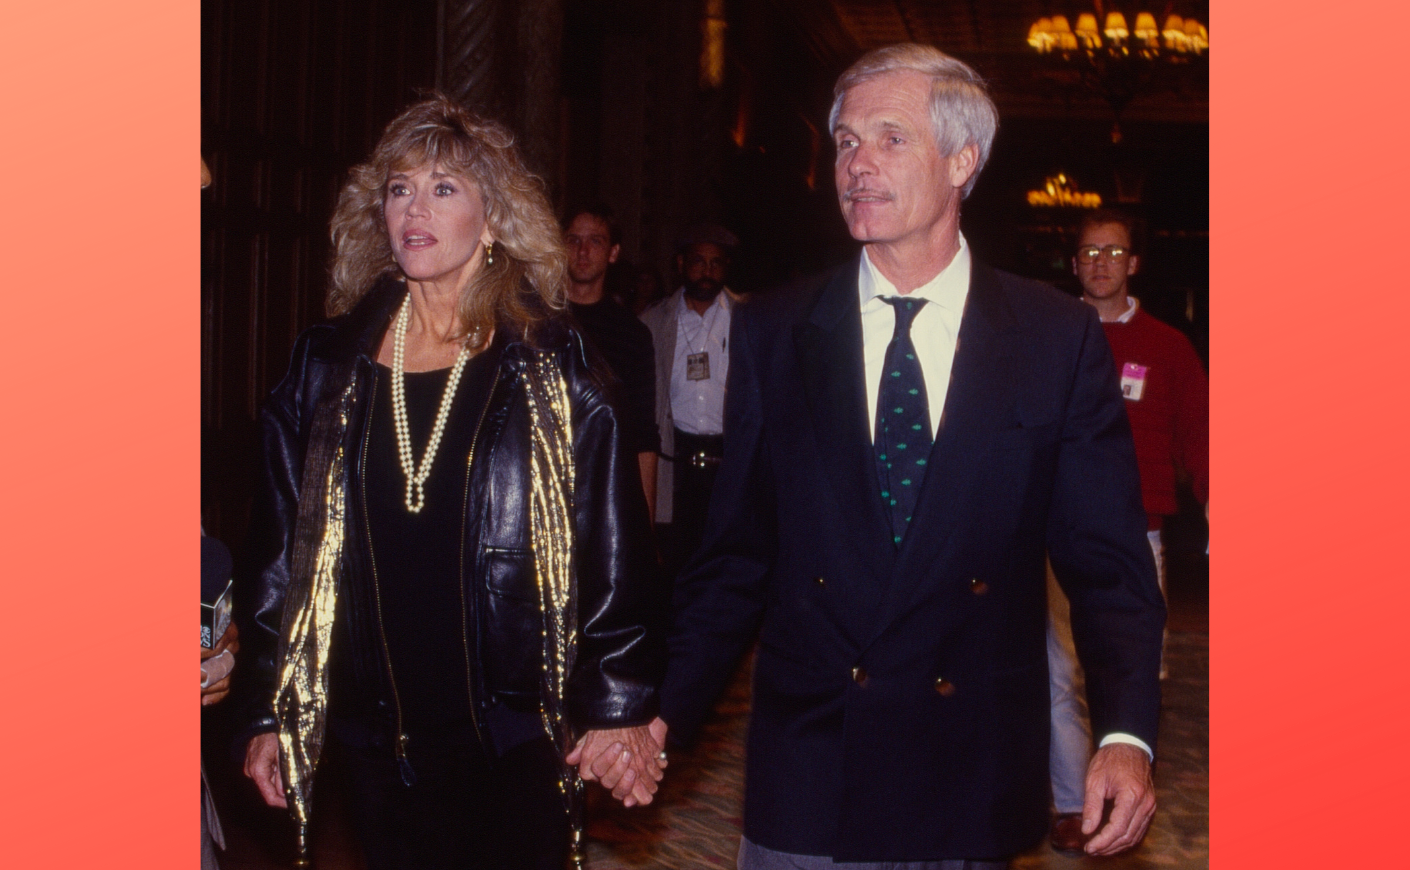 Jane Fonda and Ted Turner walk through Los Angeles in March 1990.